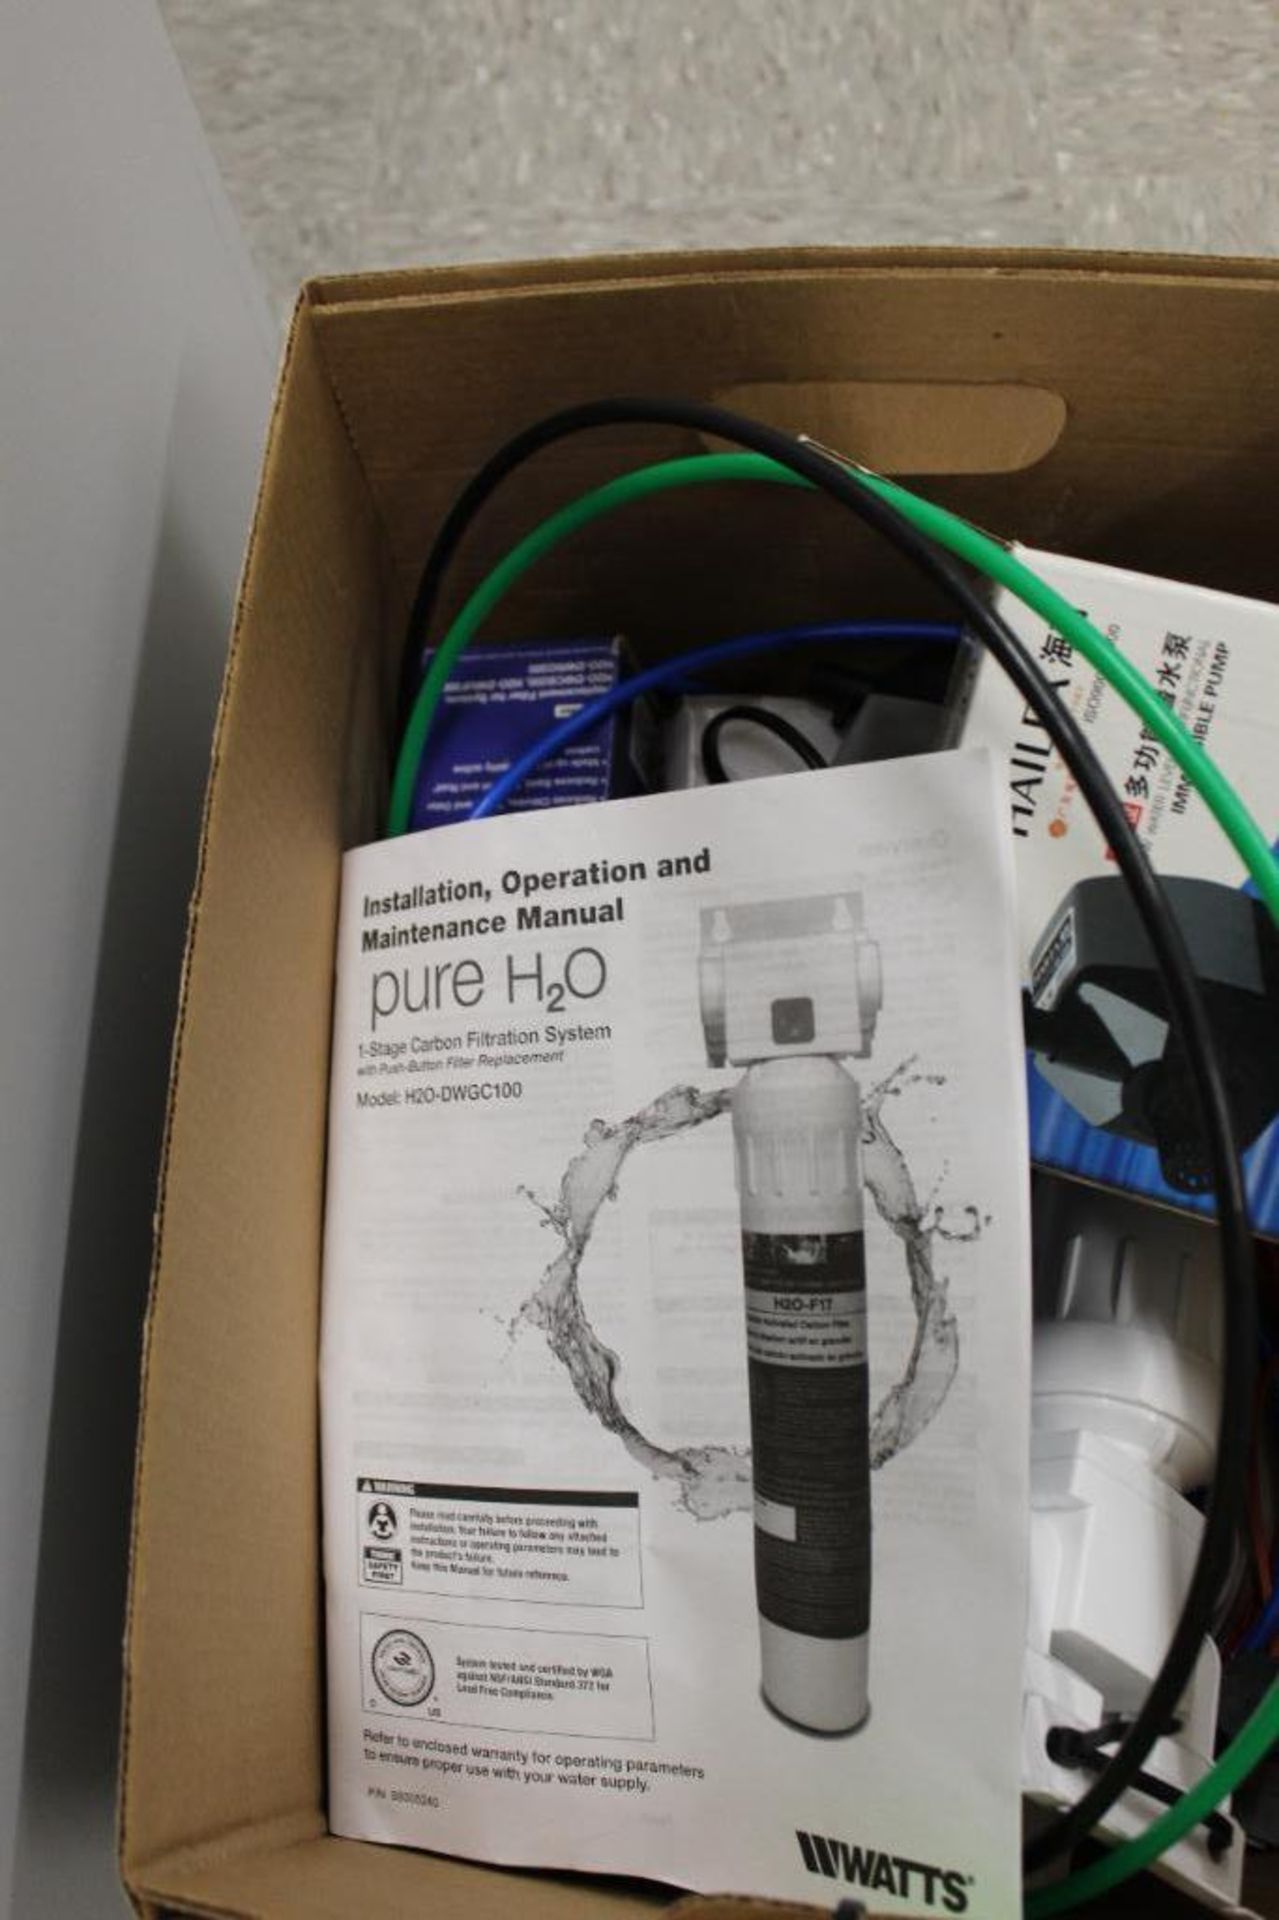 Hailea Immersible Pump & Pure H2O -HZ Carbon Block Filter, Etc. - Image 3 of 3